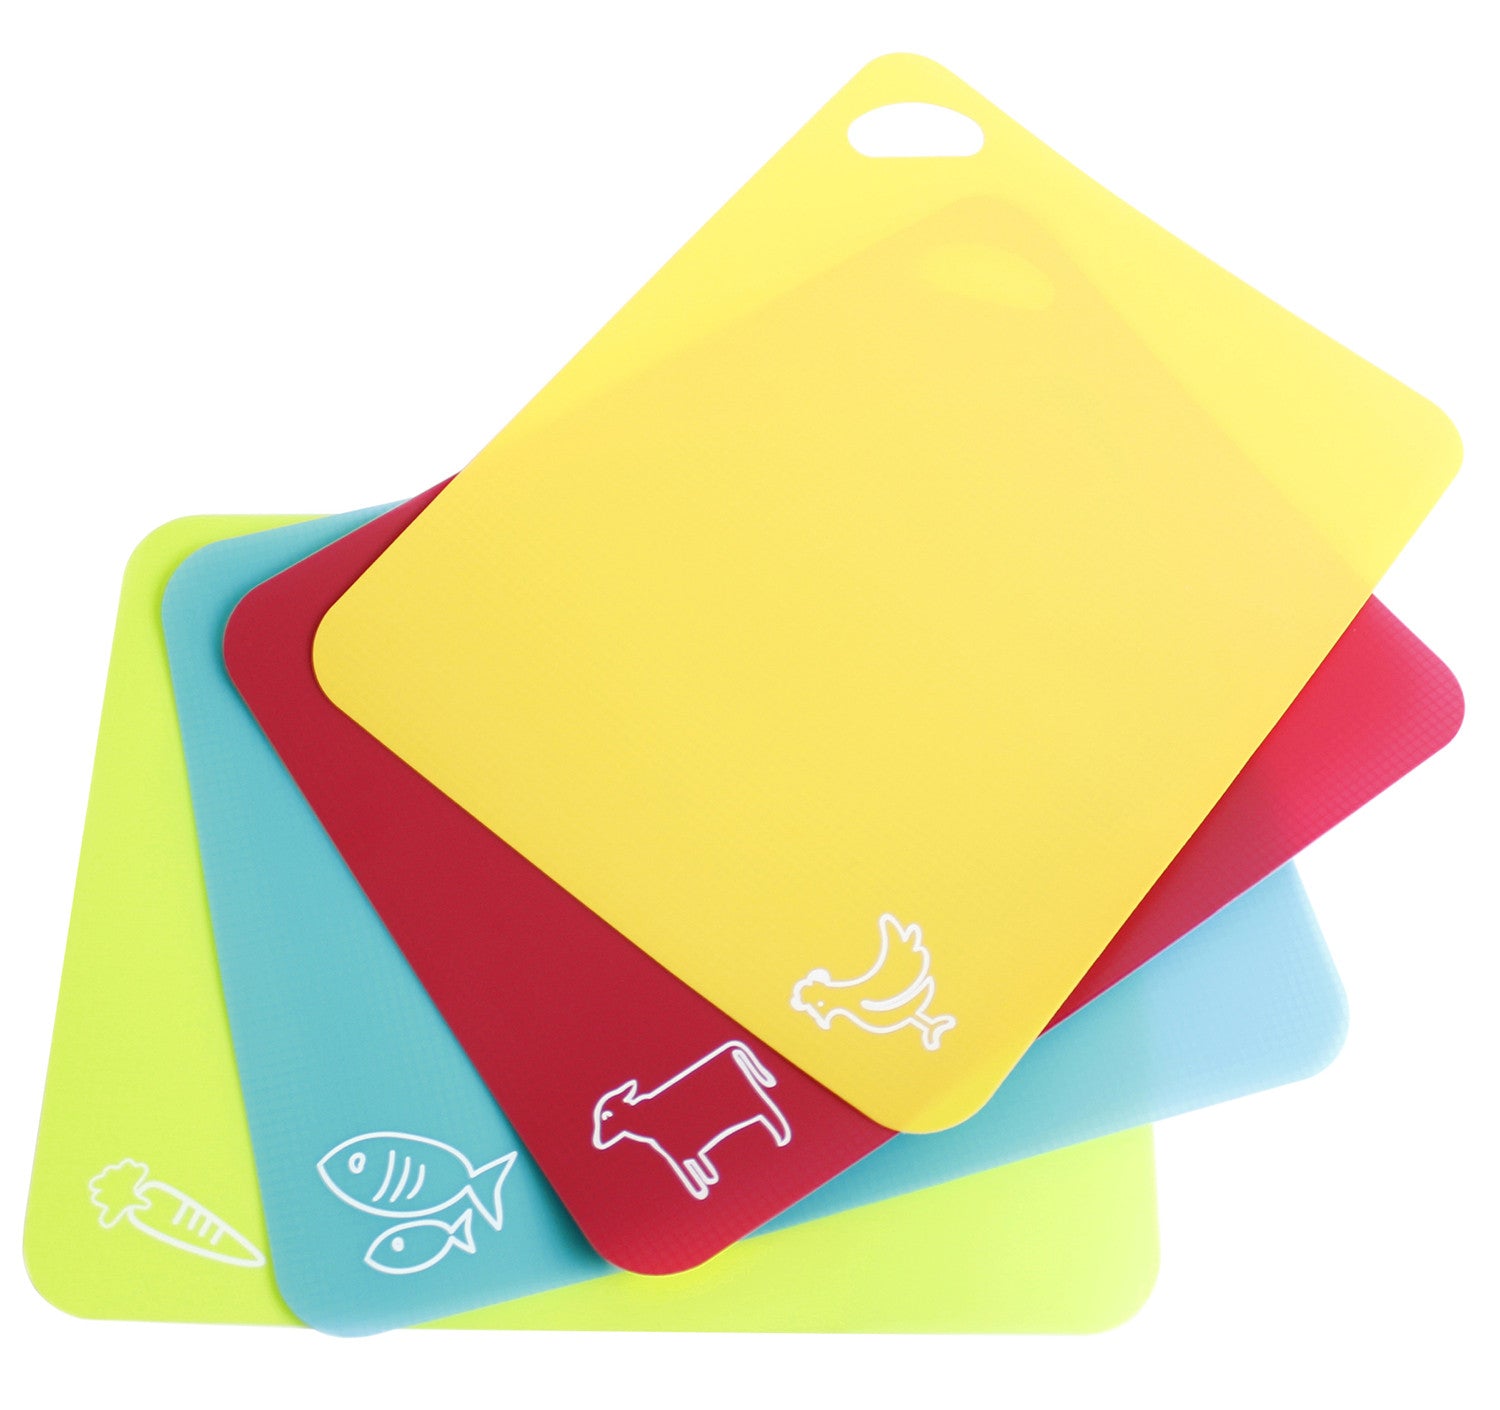 Flexible Cutting Mats 4 Piece with Non-Slip Grip in Multicolor